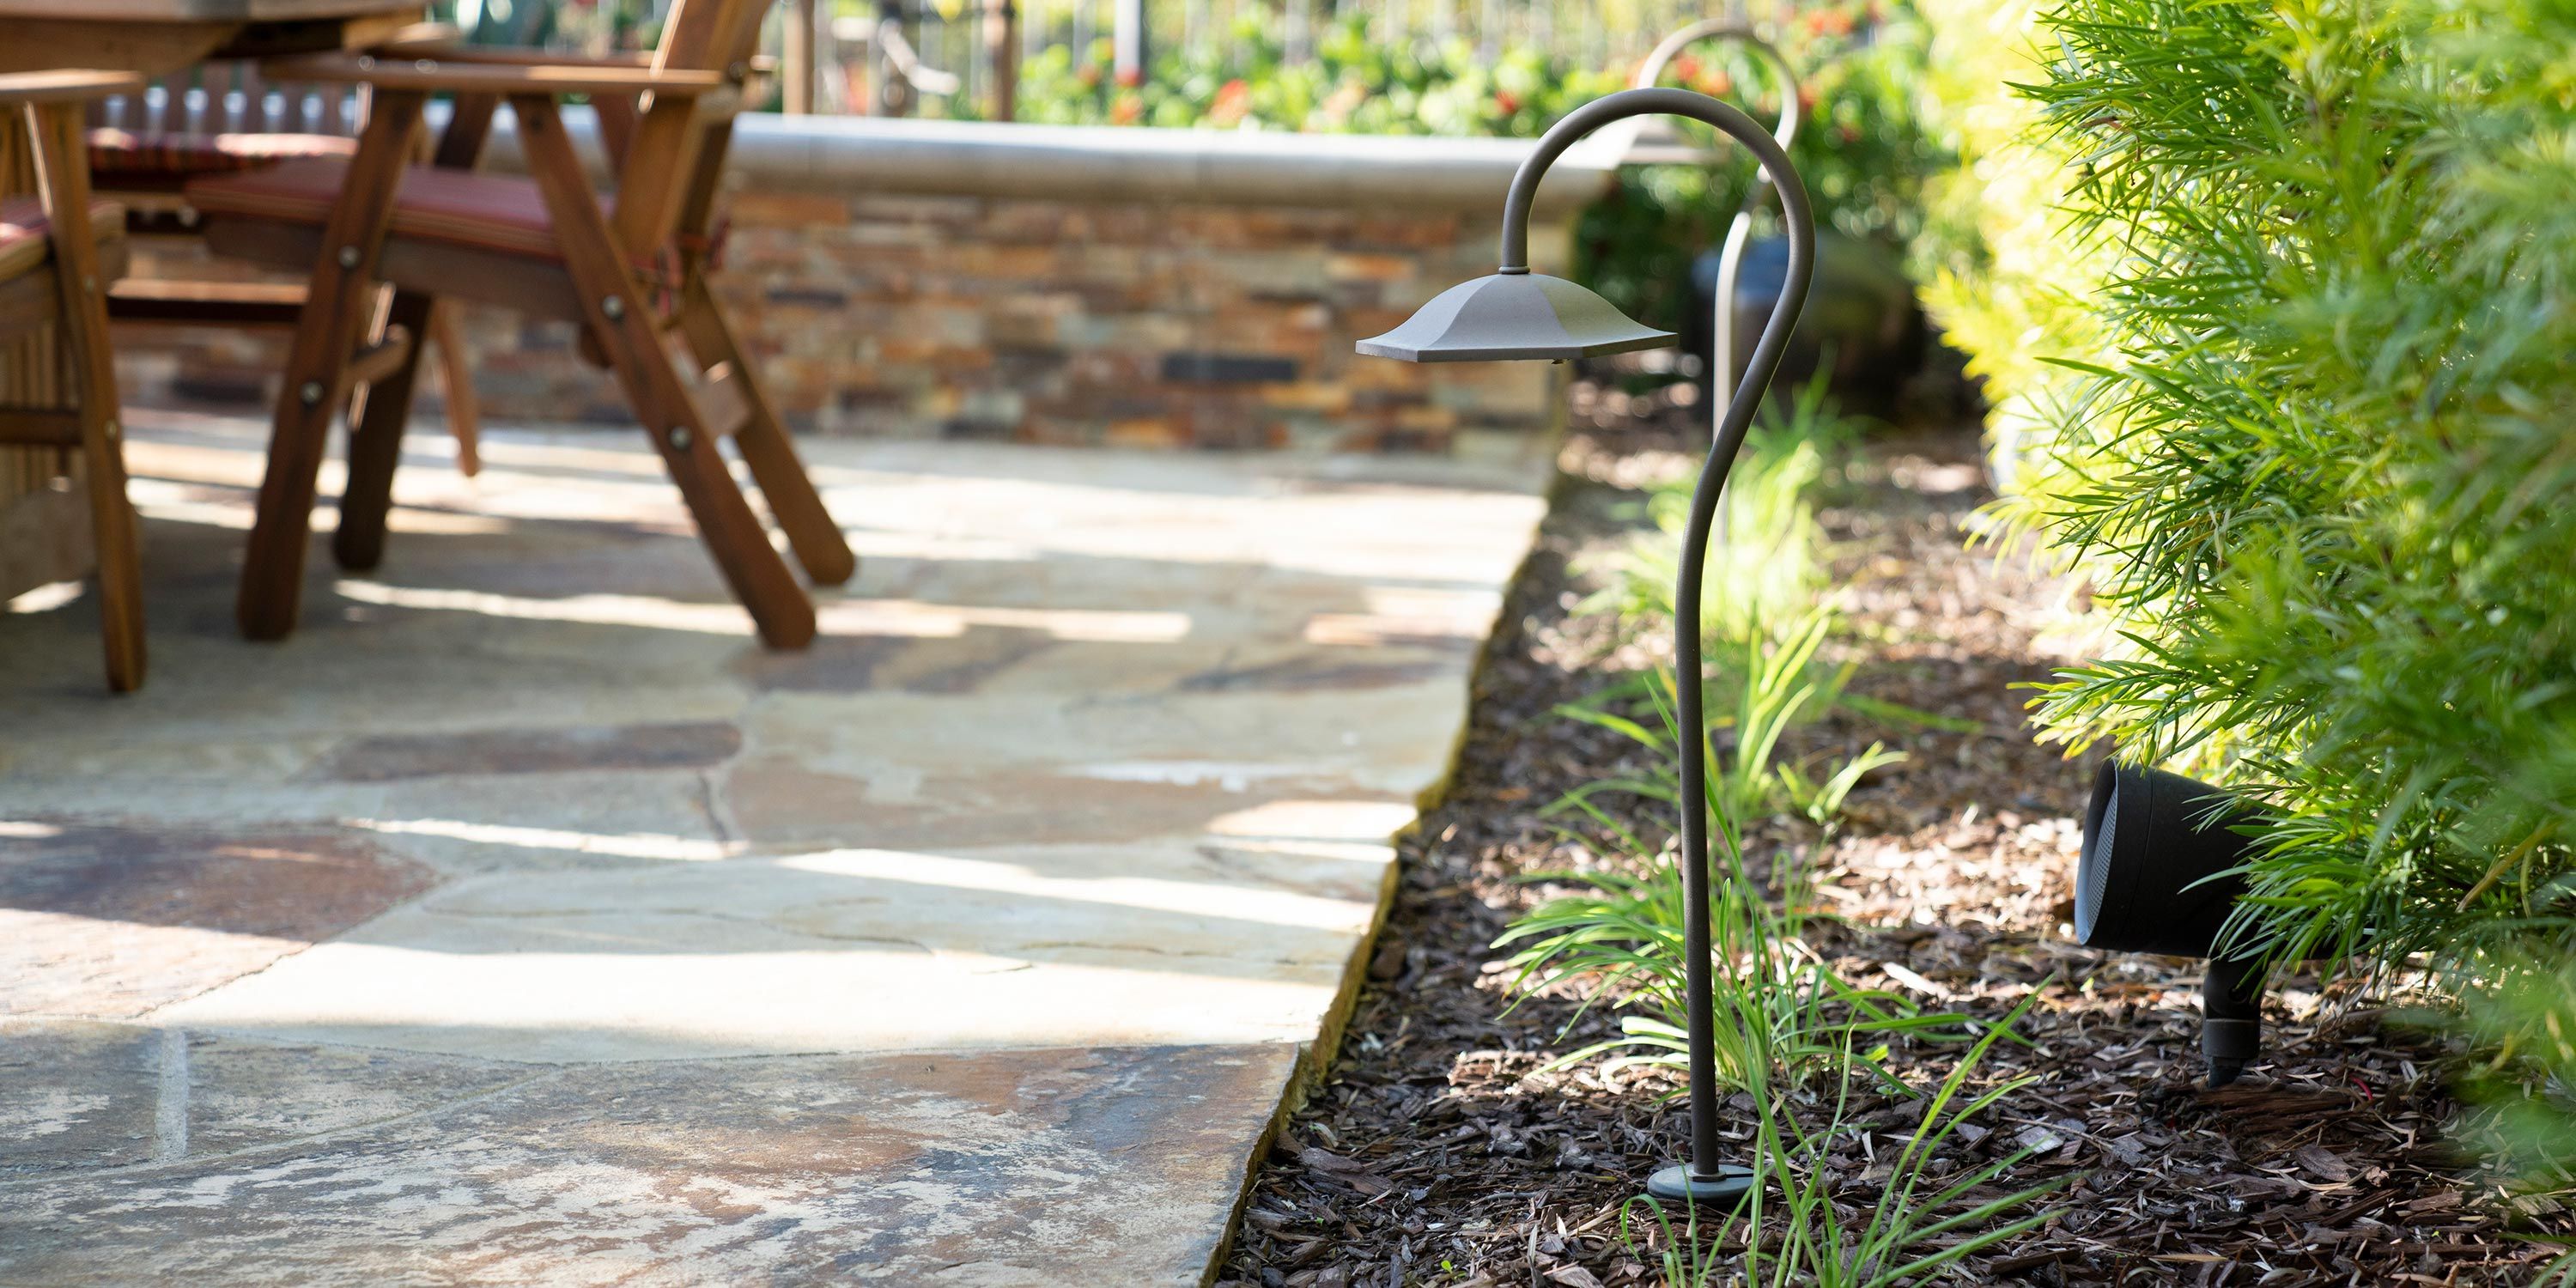 An outdoor scene featuring a path with a garden light and a wooden dining set in the background.